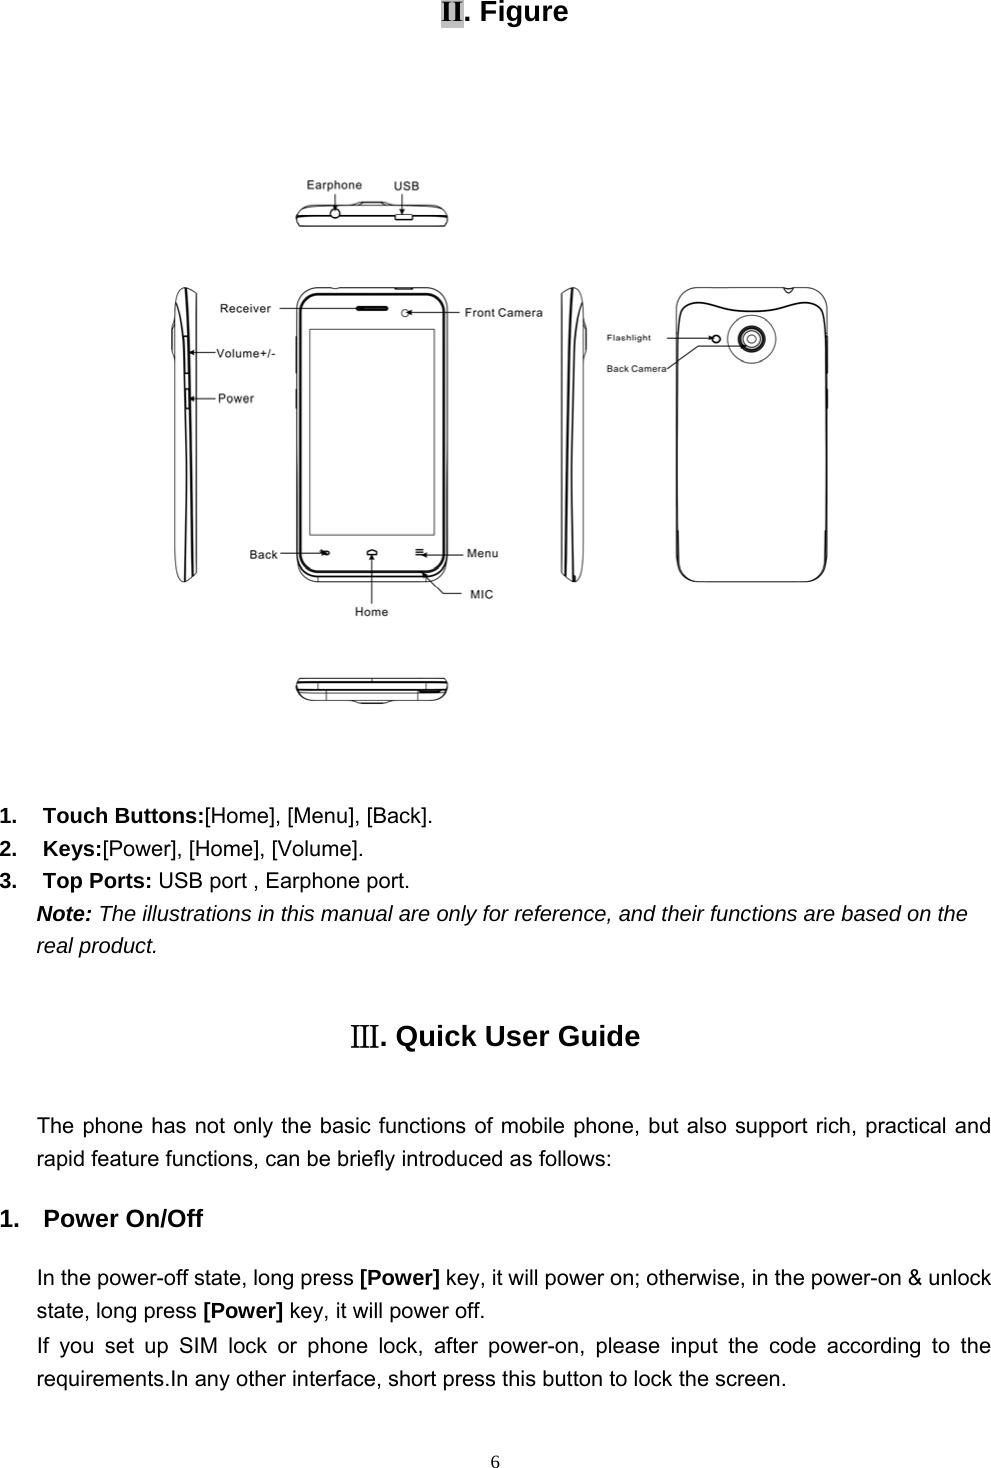  6ІІ. Figure  1. Touch Buttons:[Home], [Menu], [Back]. 2. Keys:[Power], [Home], [Volume]. 3. Top Ports: USB port , Earphone port. Note: The illustrations in this manual are only for reference, and their functions are based on the real product.   Ⅲ. Quick User Guide The phone has not only the basic functions of mobile phone, but also support rich, practical and rapid feature functions, can be briefly introduced as follows: 1. Power On/Off  In the power-off state, long press [Power] key, it will power on; otherwise, in the power-on &amp; unlock state, long press [Power] key, it will power off.   If you set up SIM lock or phone lock, after power-on, please input the code according to the requirements.In any other interface, short press this button to lock the screen. 